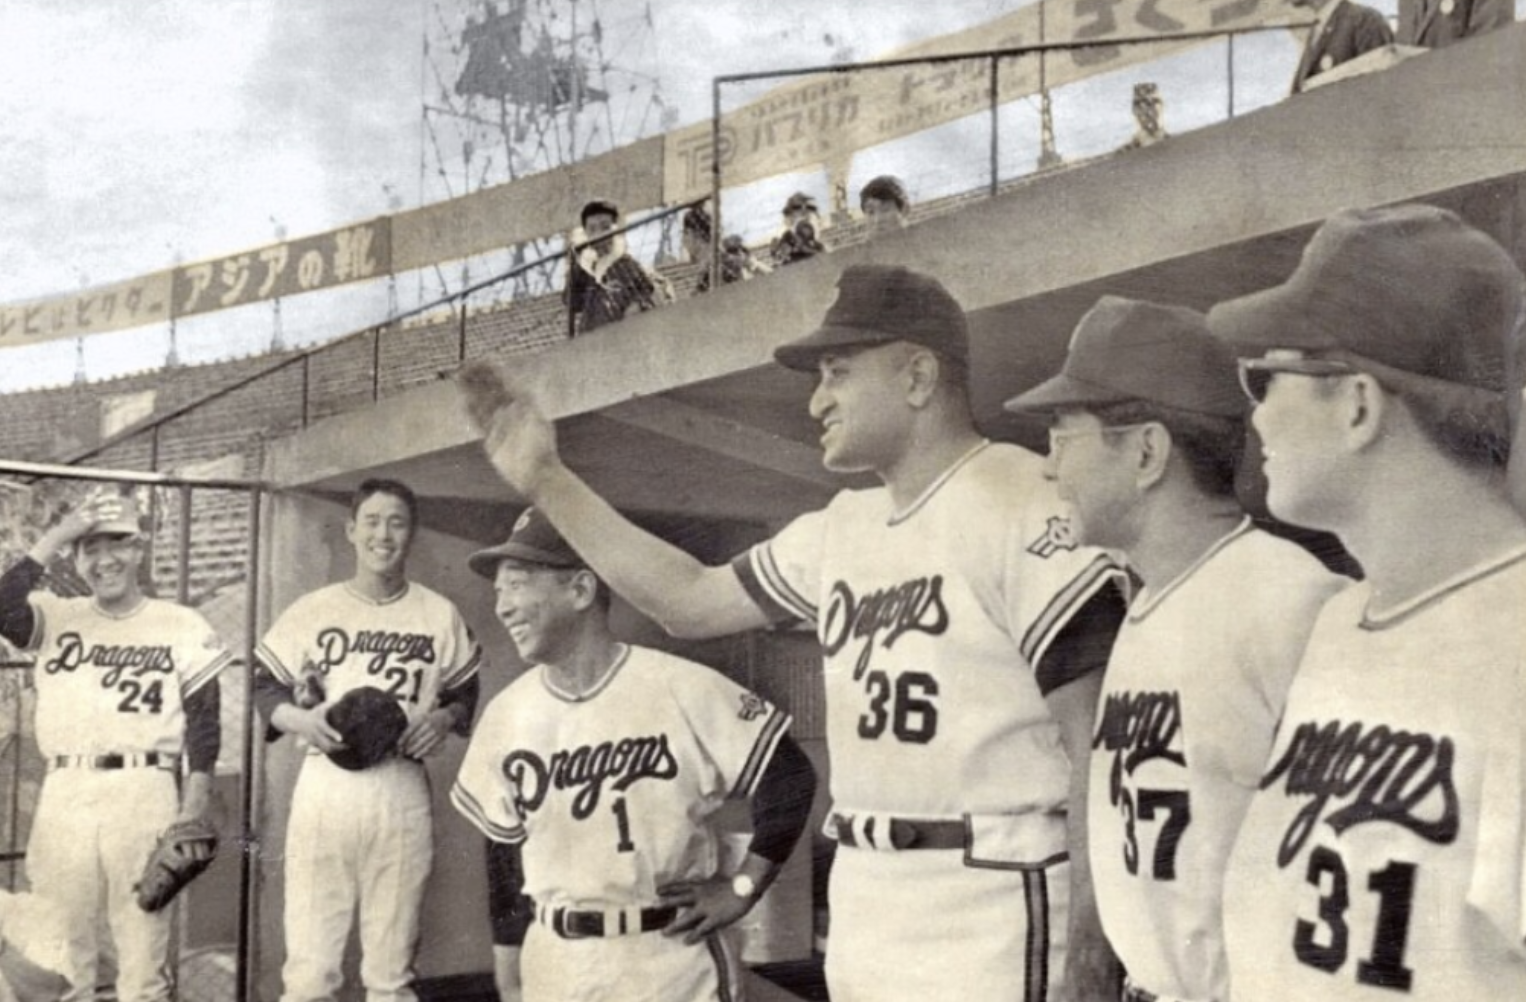 Larry Doby, Don Newcombe first Major Leaguers to play in NPB